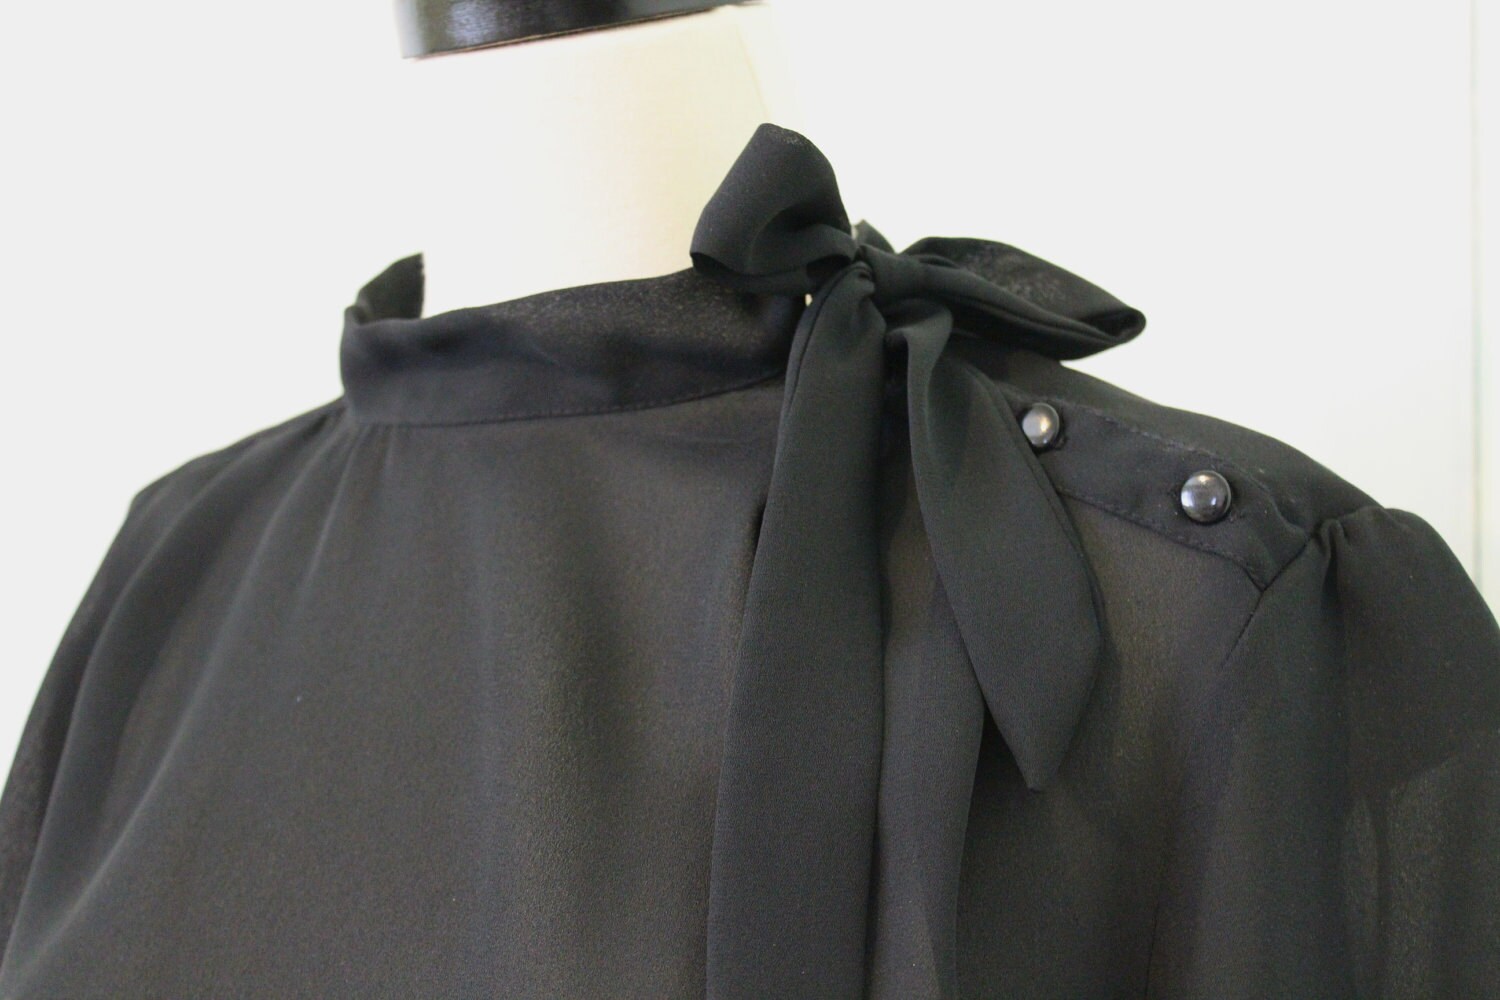 Black Sheer Dress With Bow Tie - Etsy